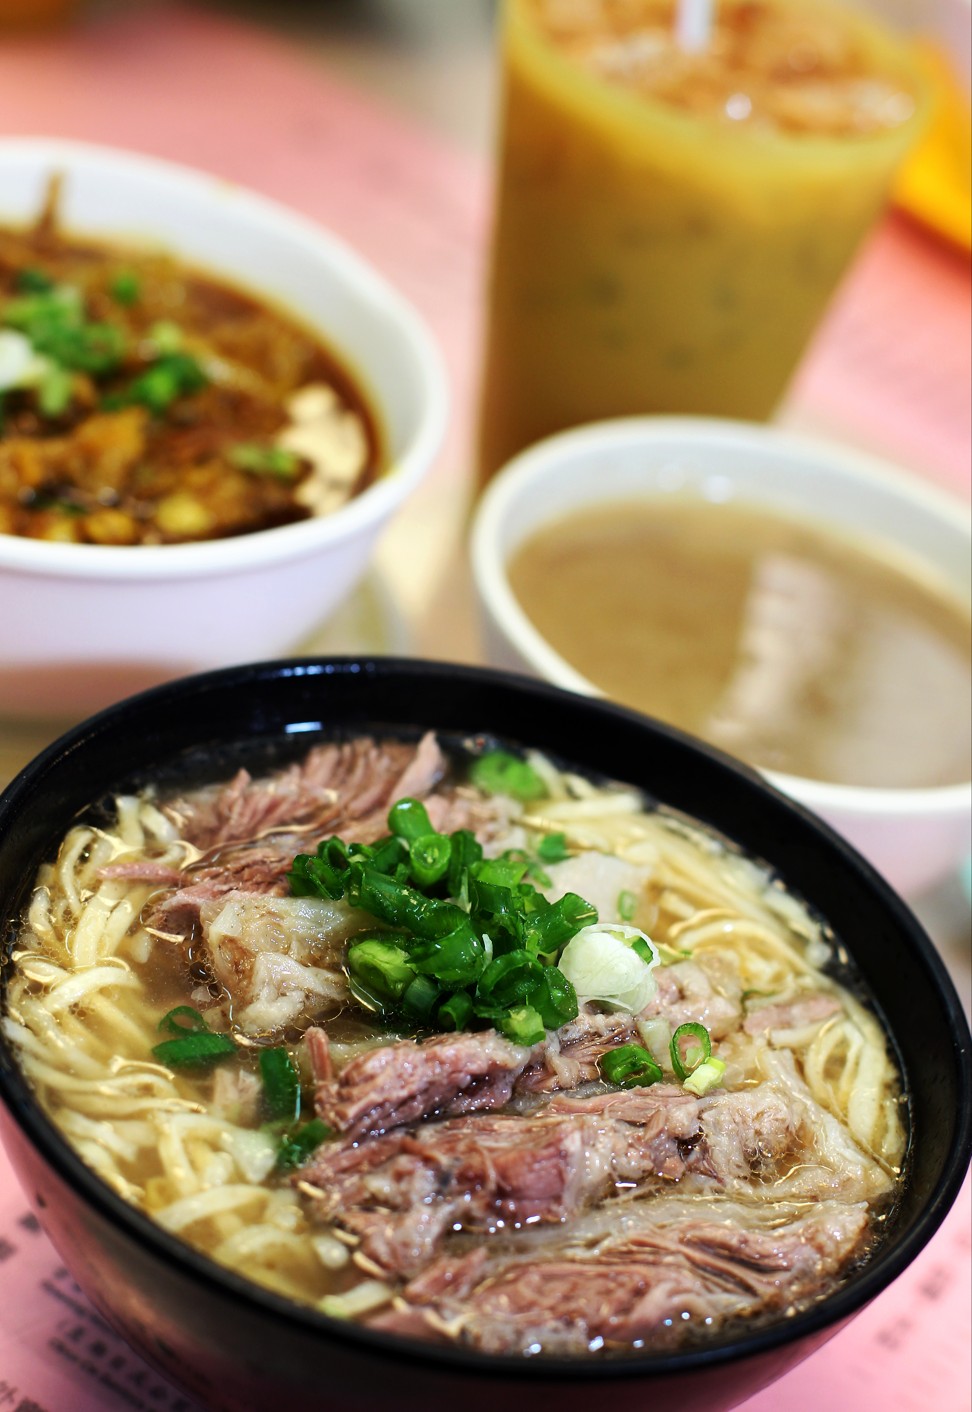 Beef brisket noodles by Kau Kee in Central. Photo: May Tse